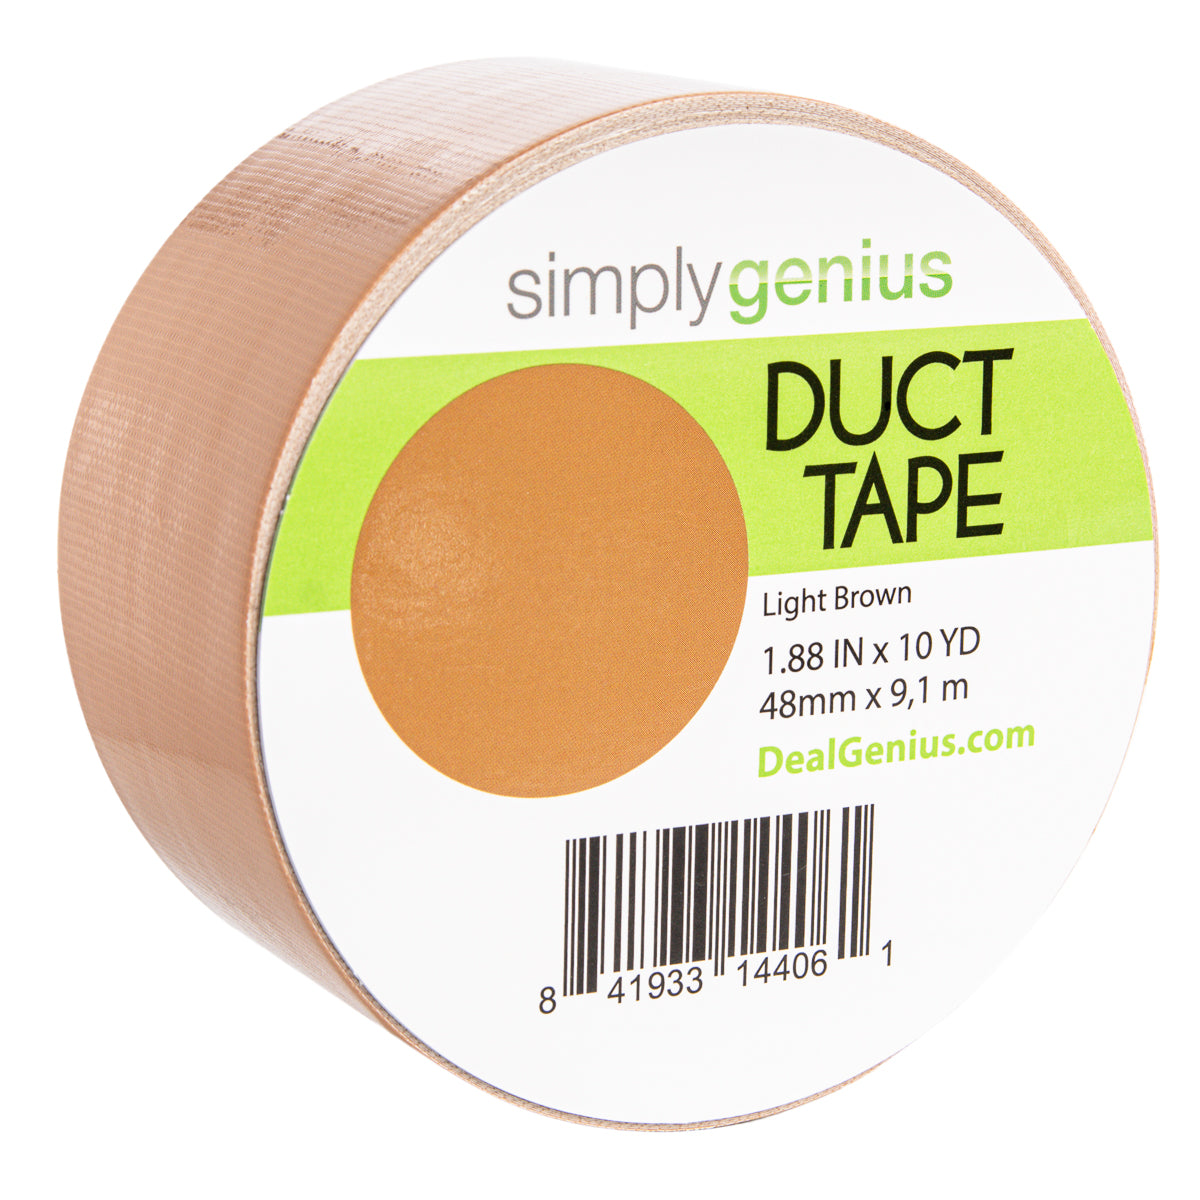 Simply Genius (Single Roll) Patterned Duct Tape Roll Craft Supplies for Kids Adults Colored Duct Tape Colors, Tropical Breeze